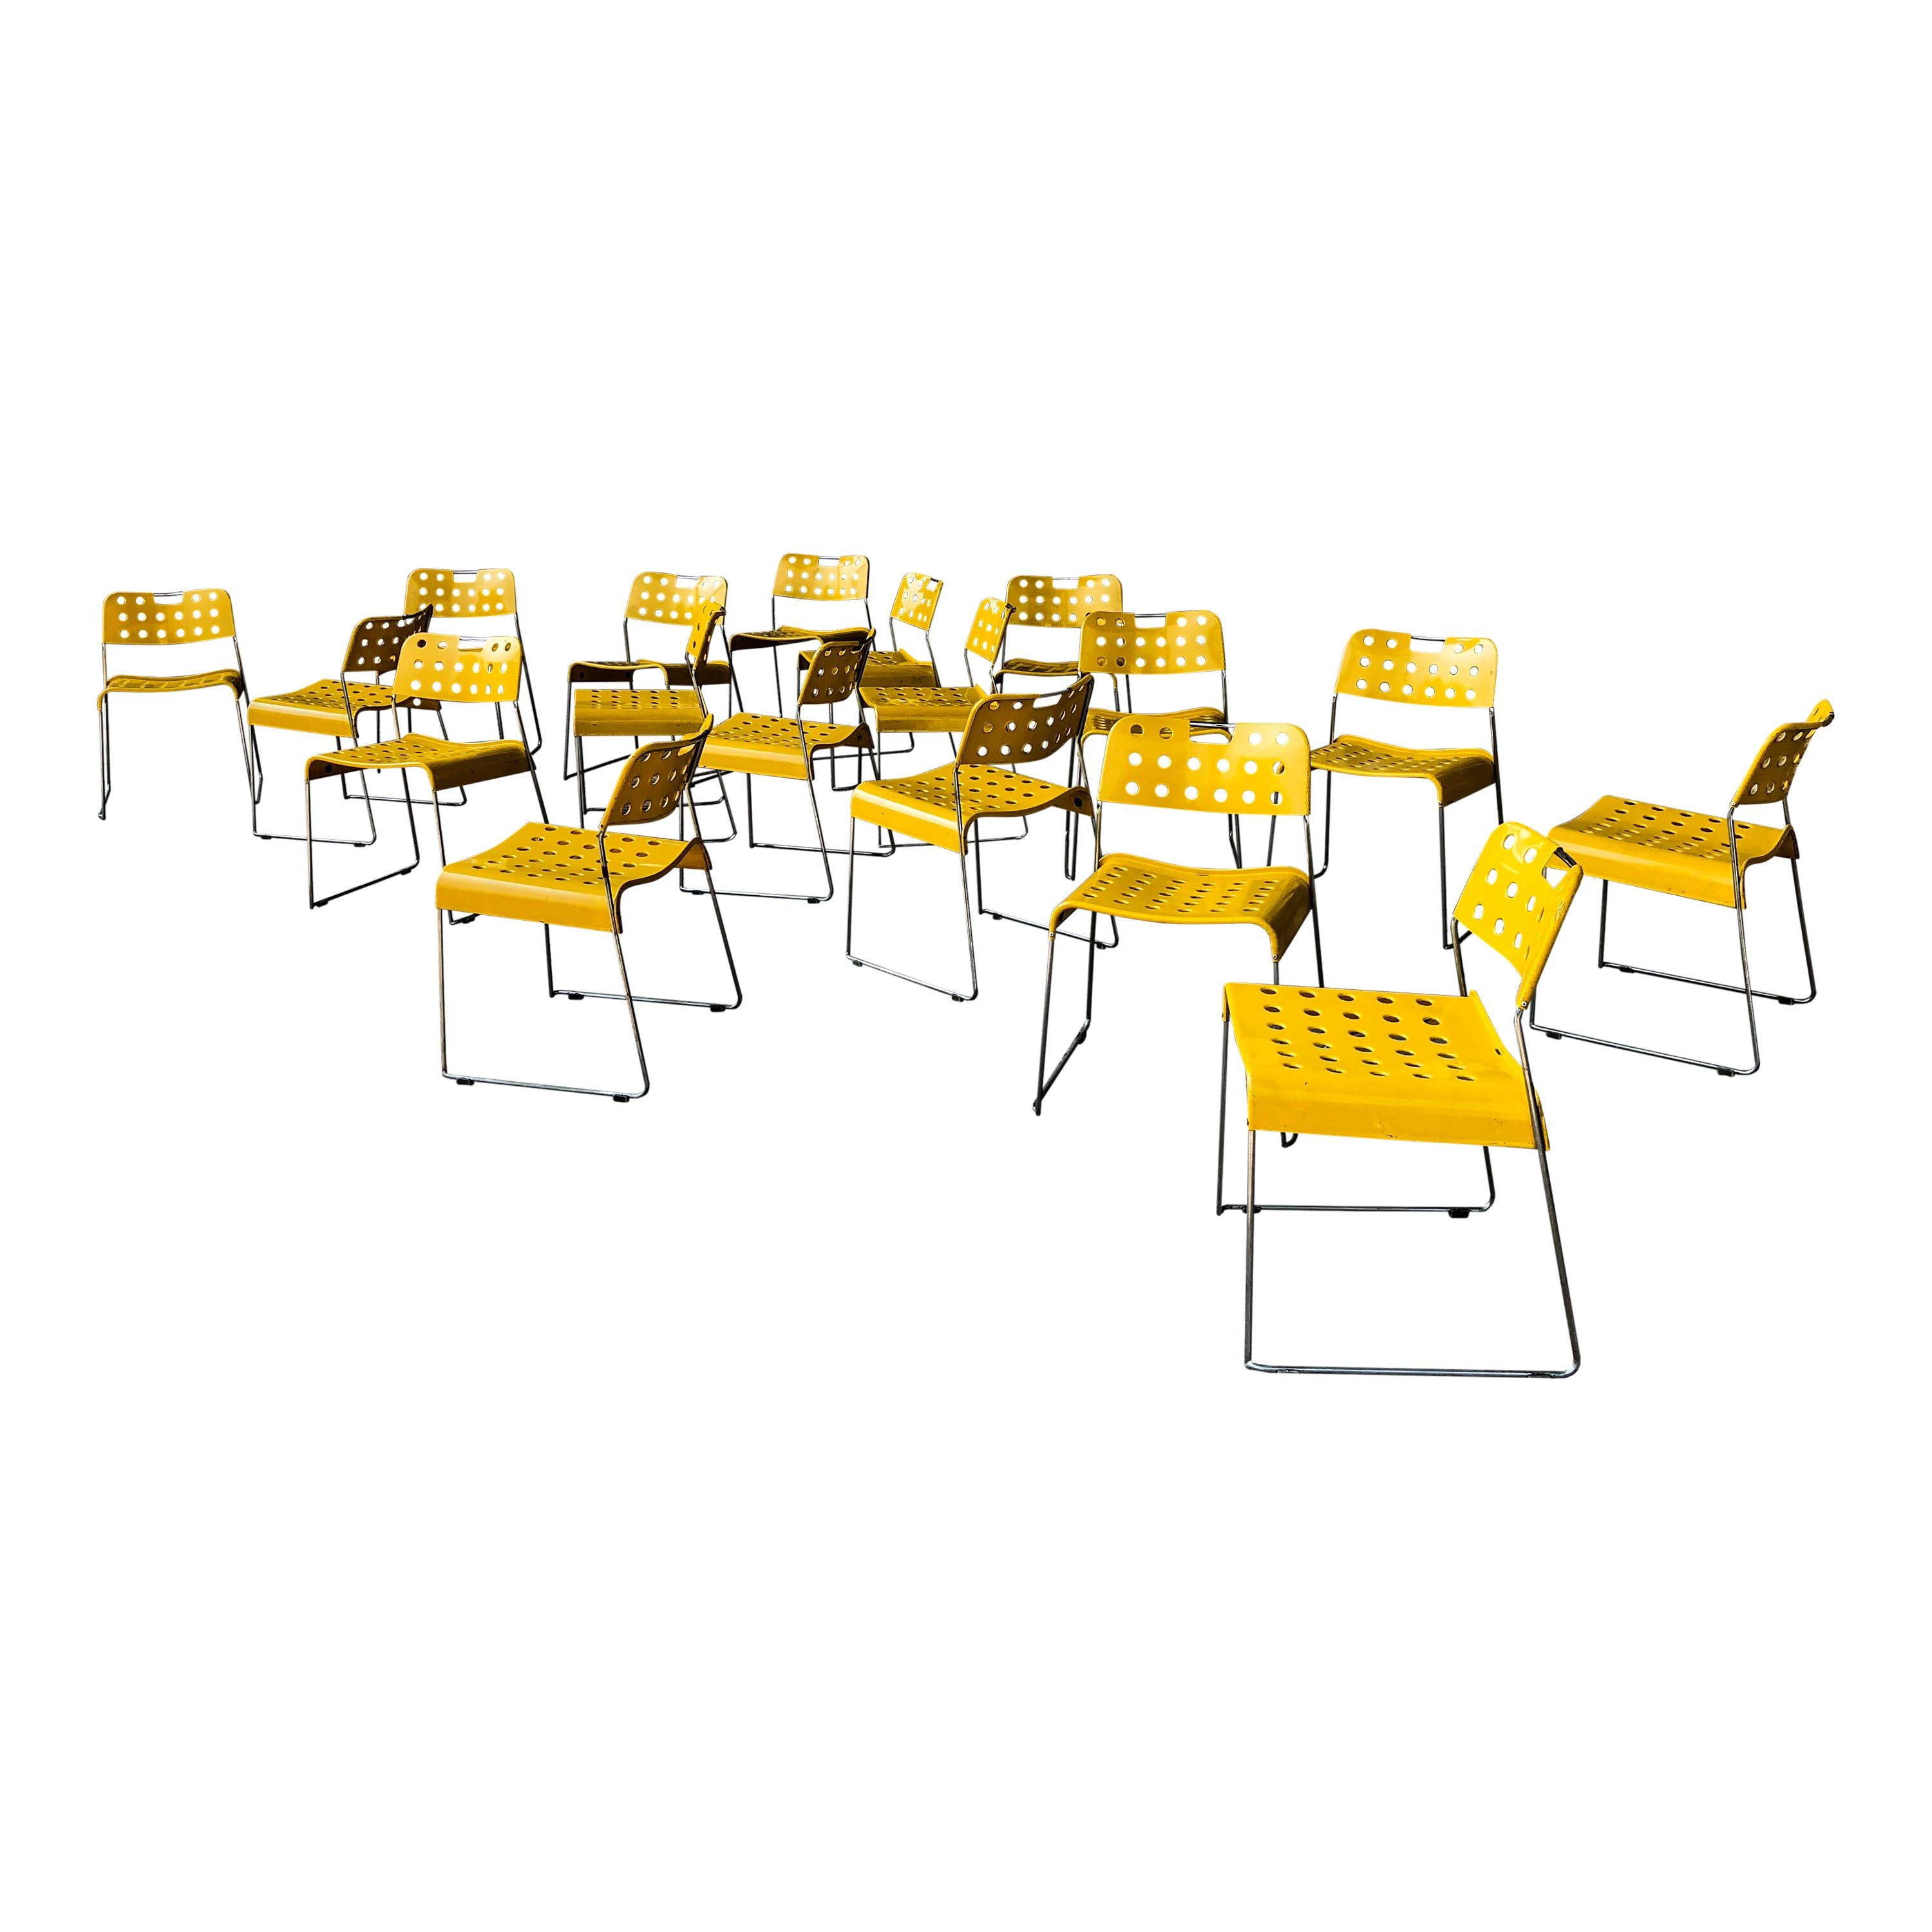 Rodney Kinsman Space Age Yellow Omstak Chair for Bieffeplast, 1971, Set of 8 For Sale 1